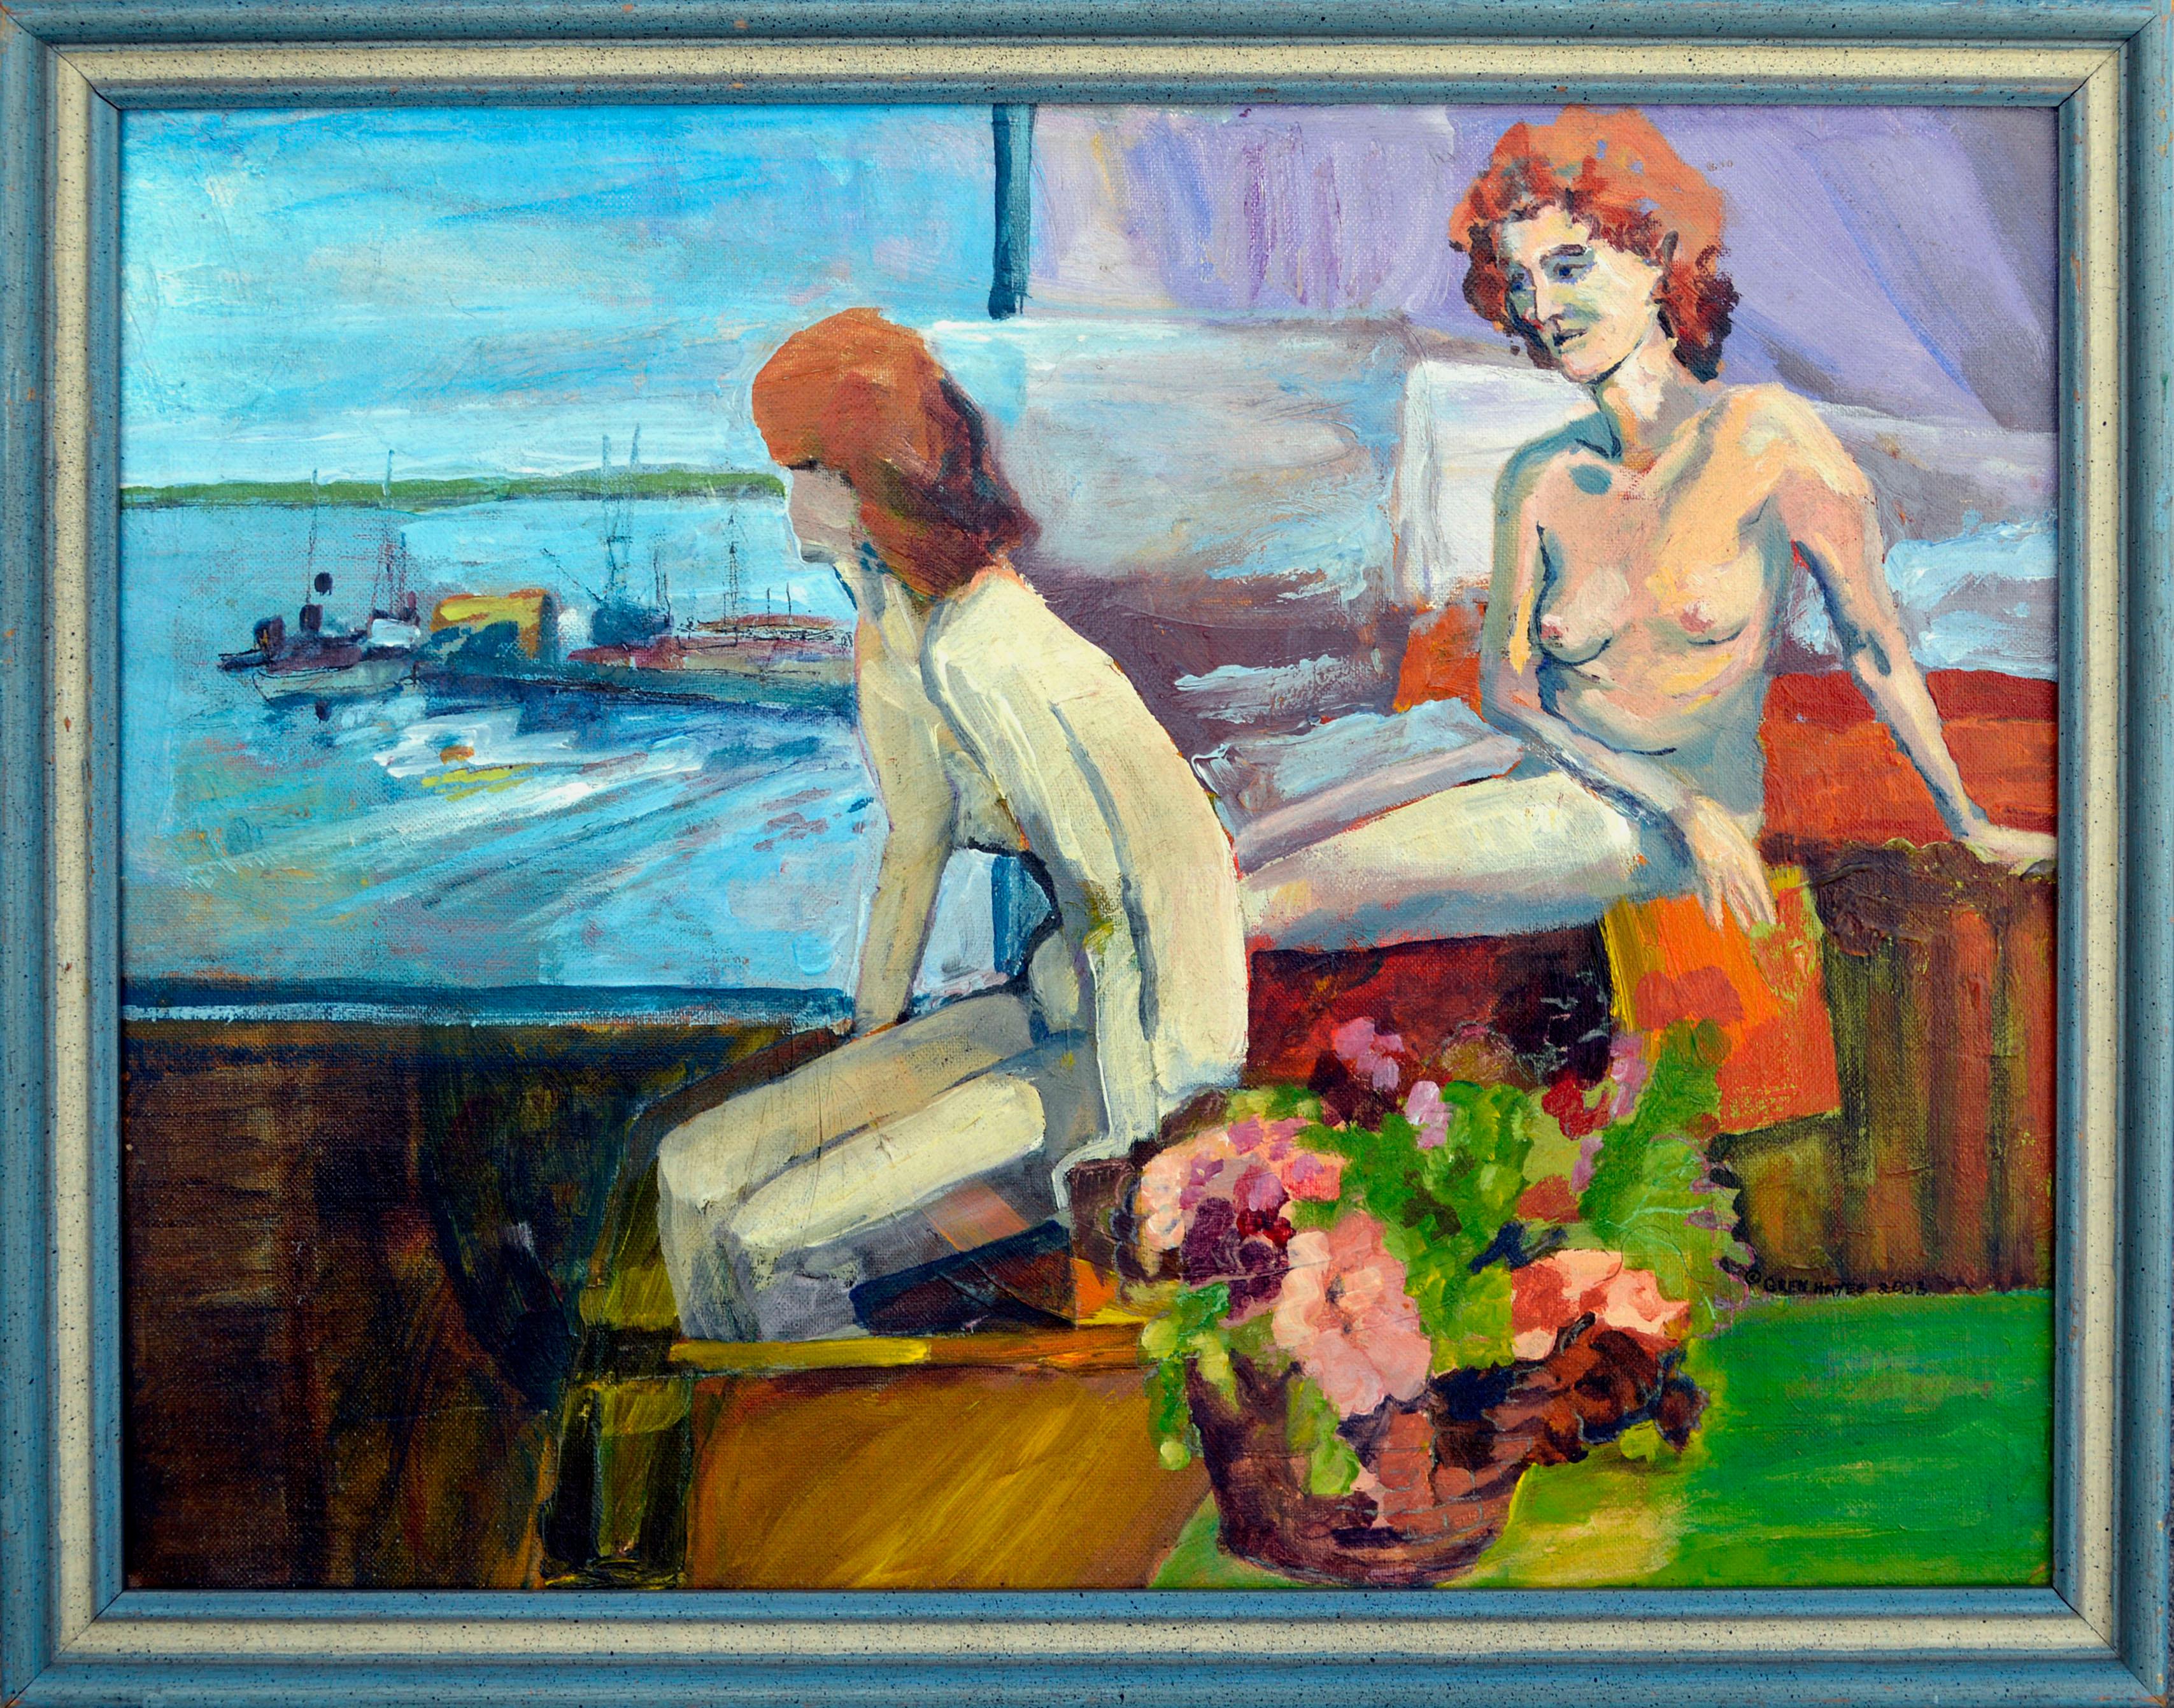 "Looking out the Window" - Bay Area Figurative Landscape 